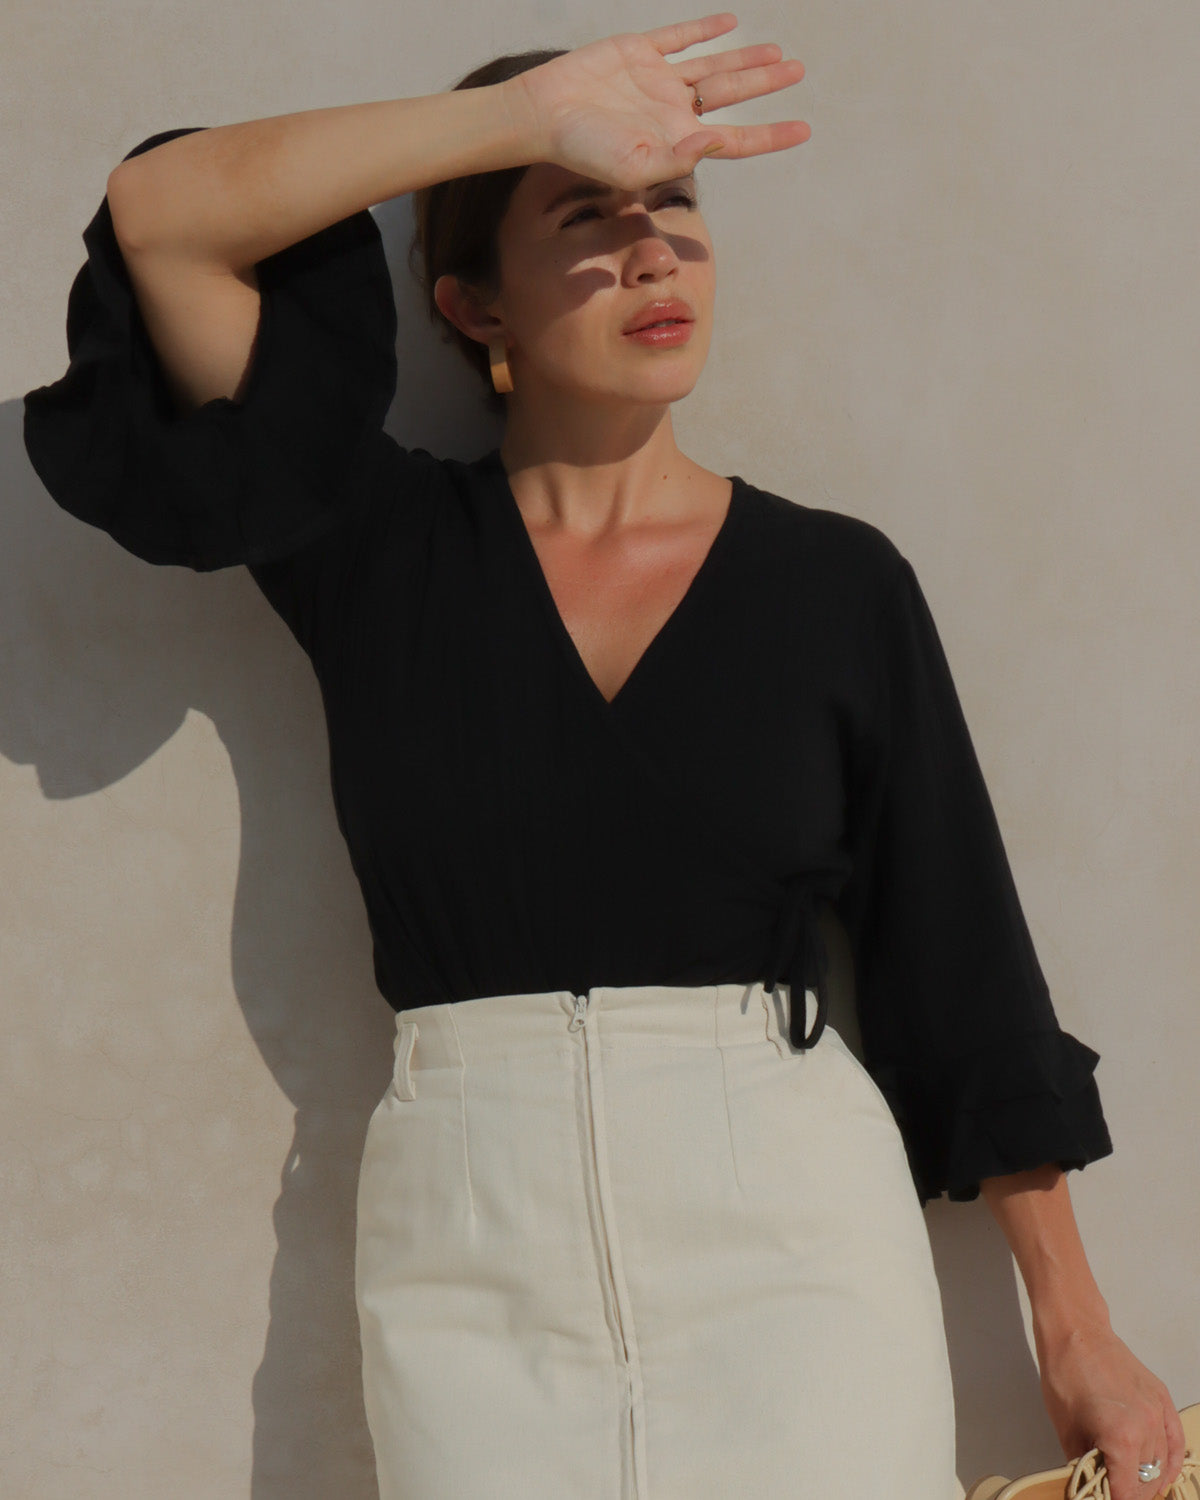 100% organic cotton gauze wrap top blouse made sustainably in B.C., Canada. 